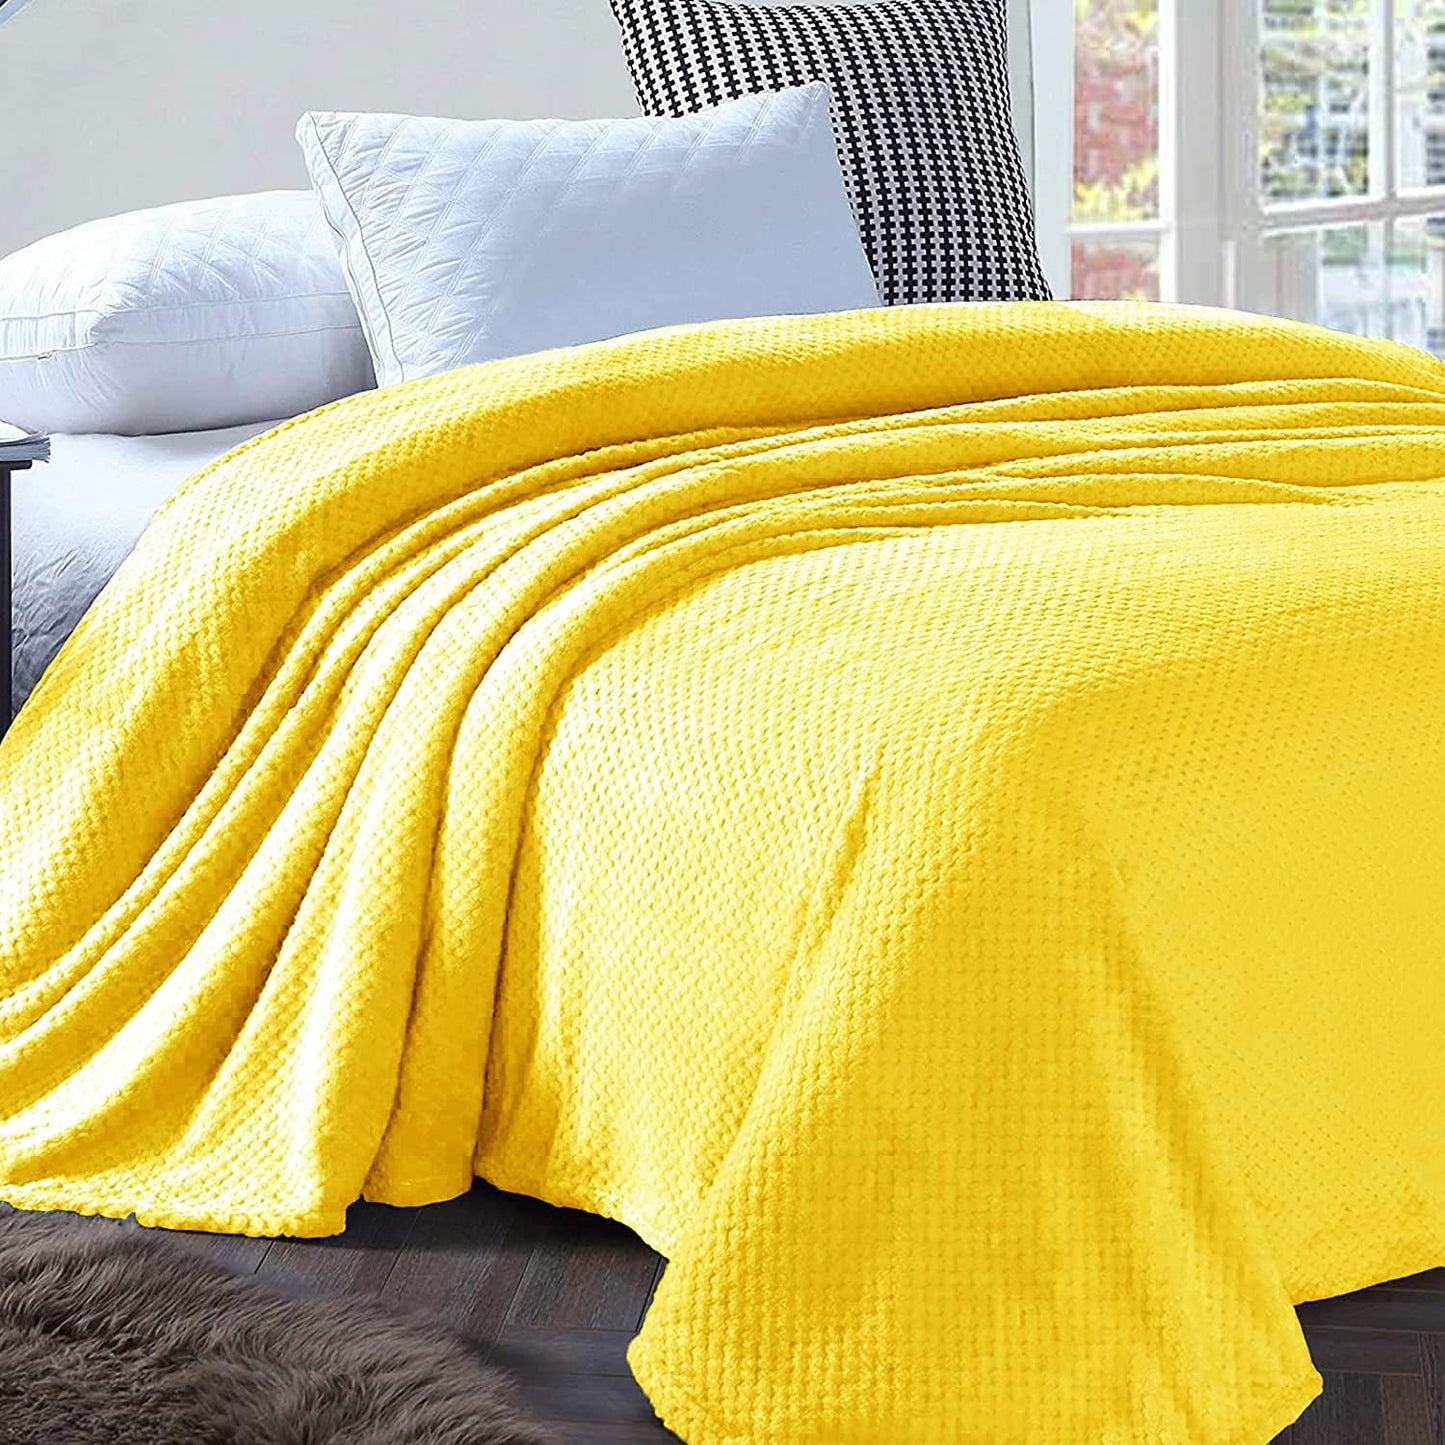 Exclusivo Mezcla Waffle Textured Soft Fleece Blanket, King Size Bed Blanket, Cozy Warm and Lightweight (Vibrant Yellow, 90x104 inches)